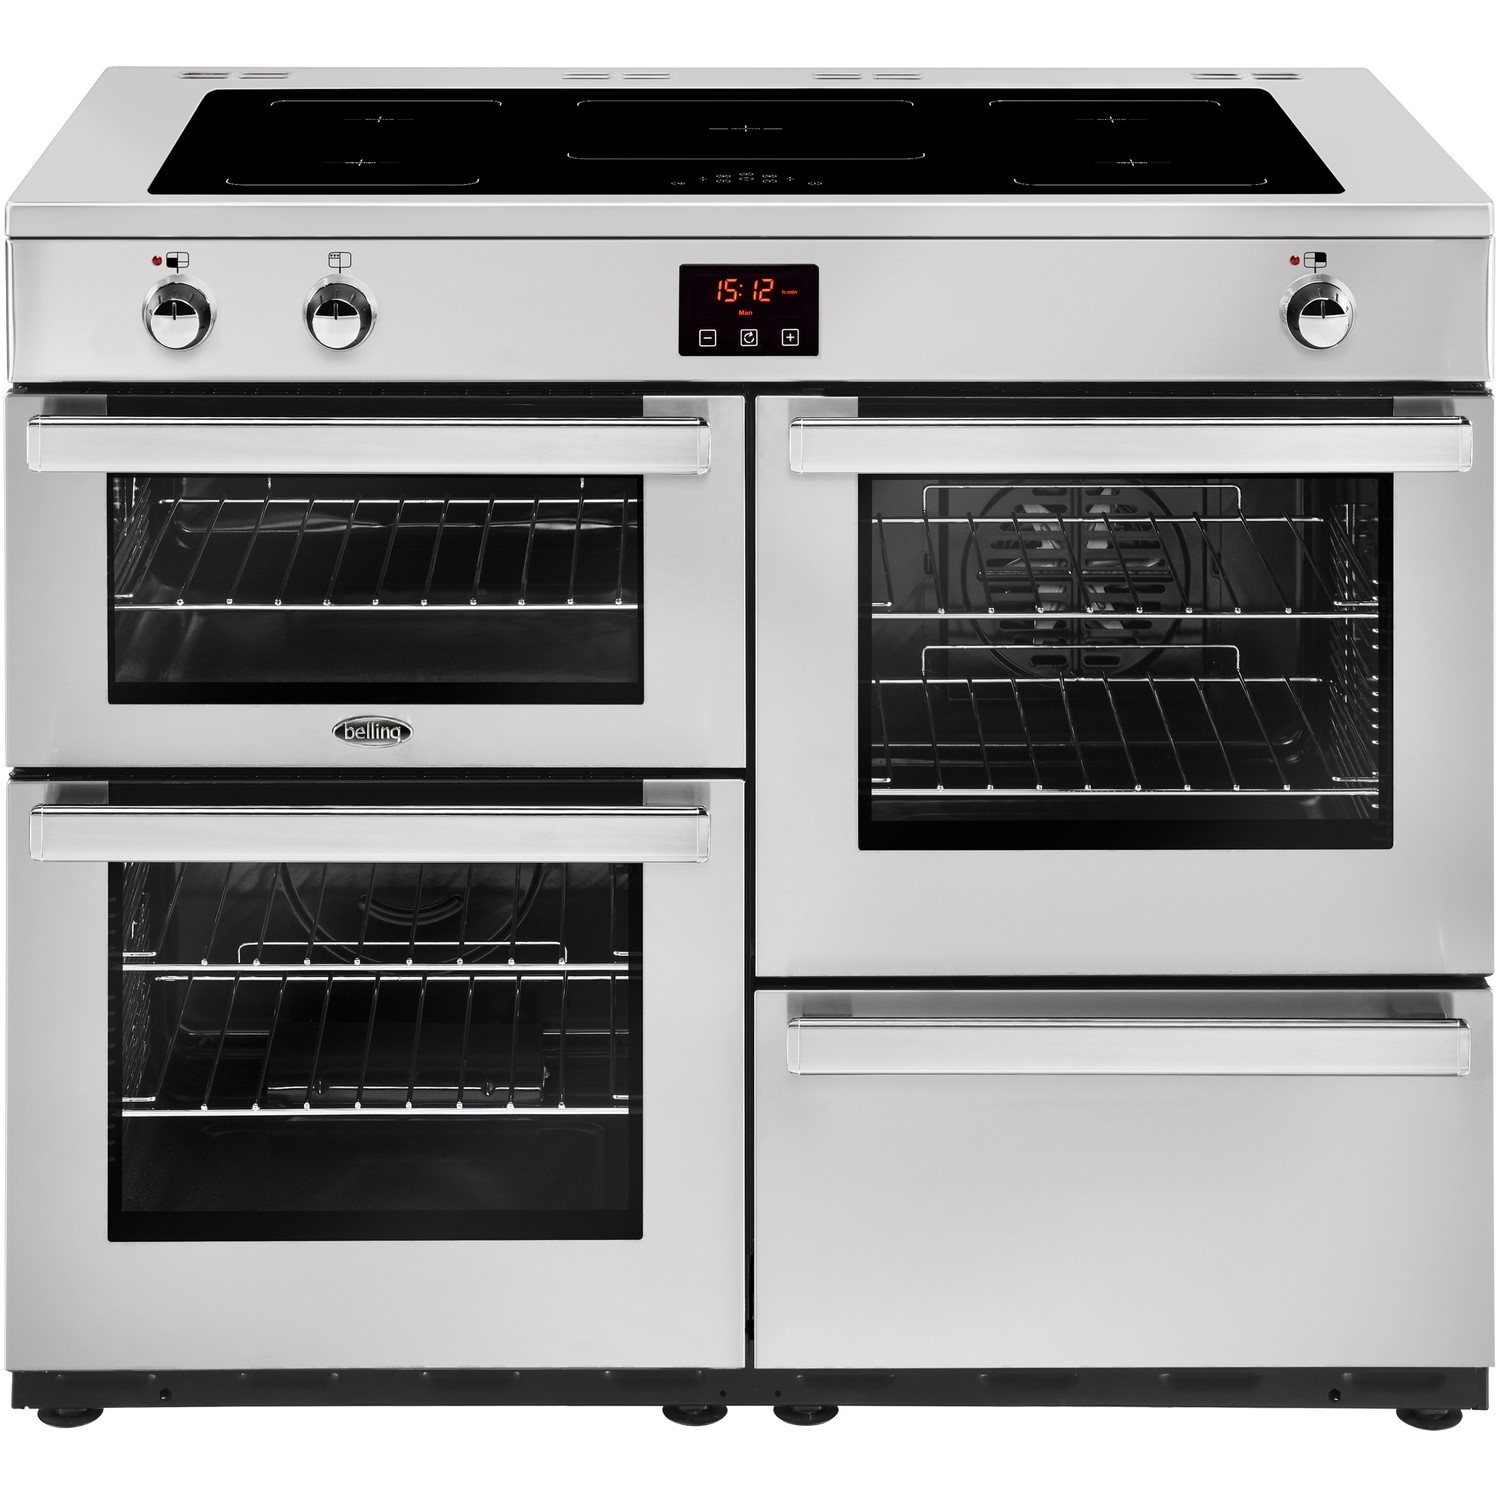 Belling Cookcentre 110Ei Professional 110cm Electric Range Cooker with Induction Hob - Stainless ste